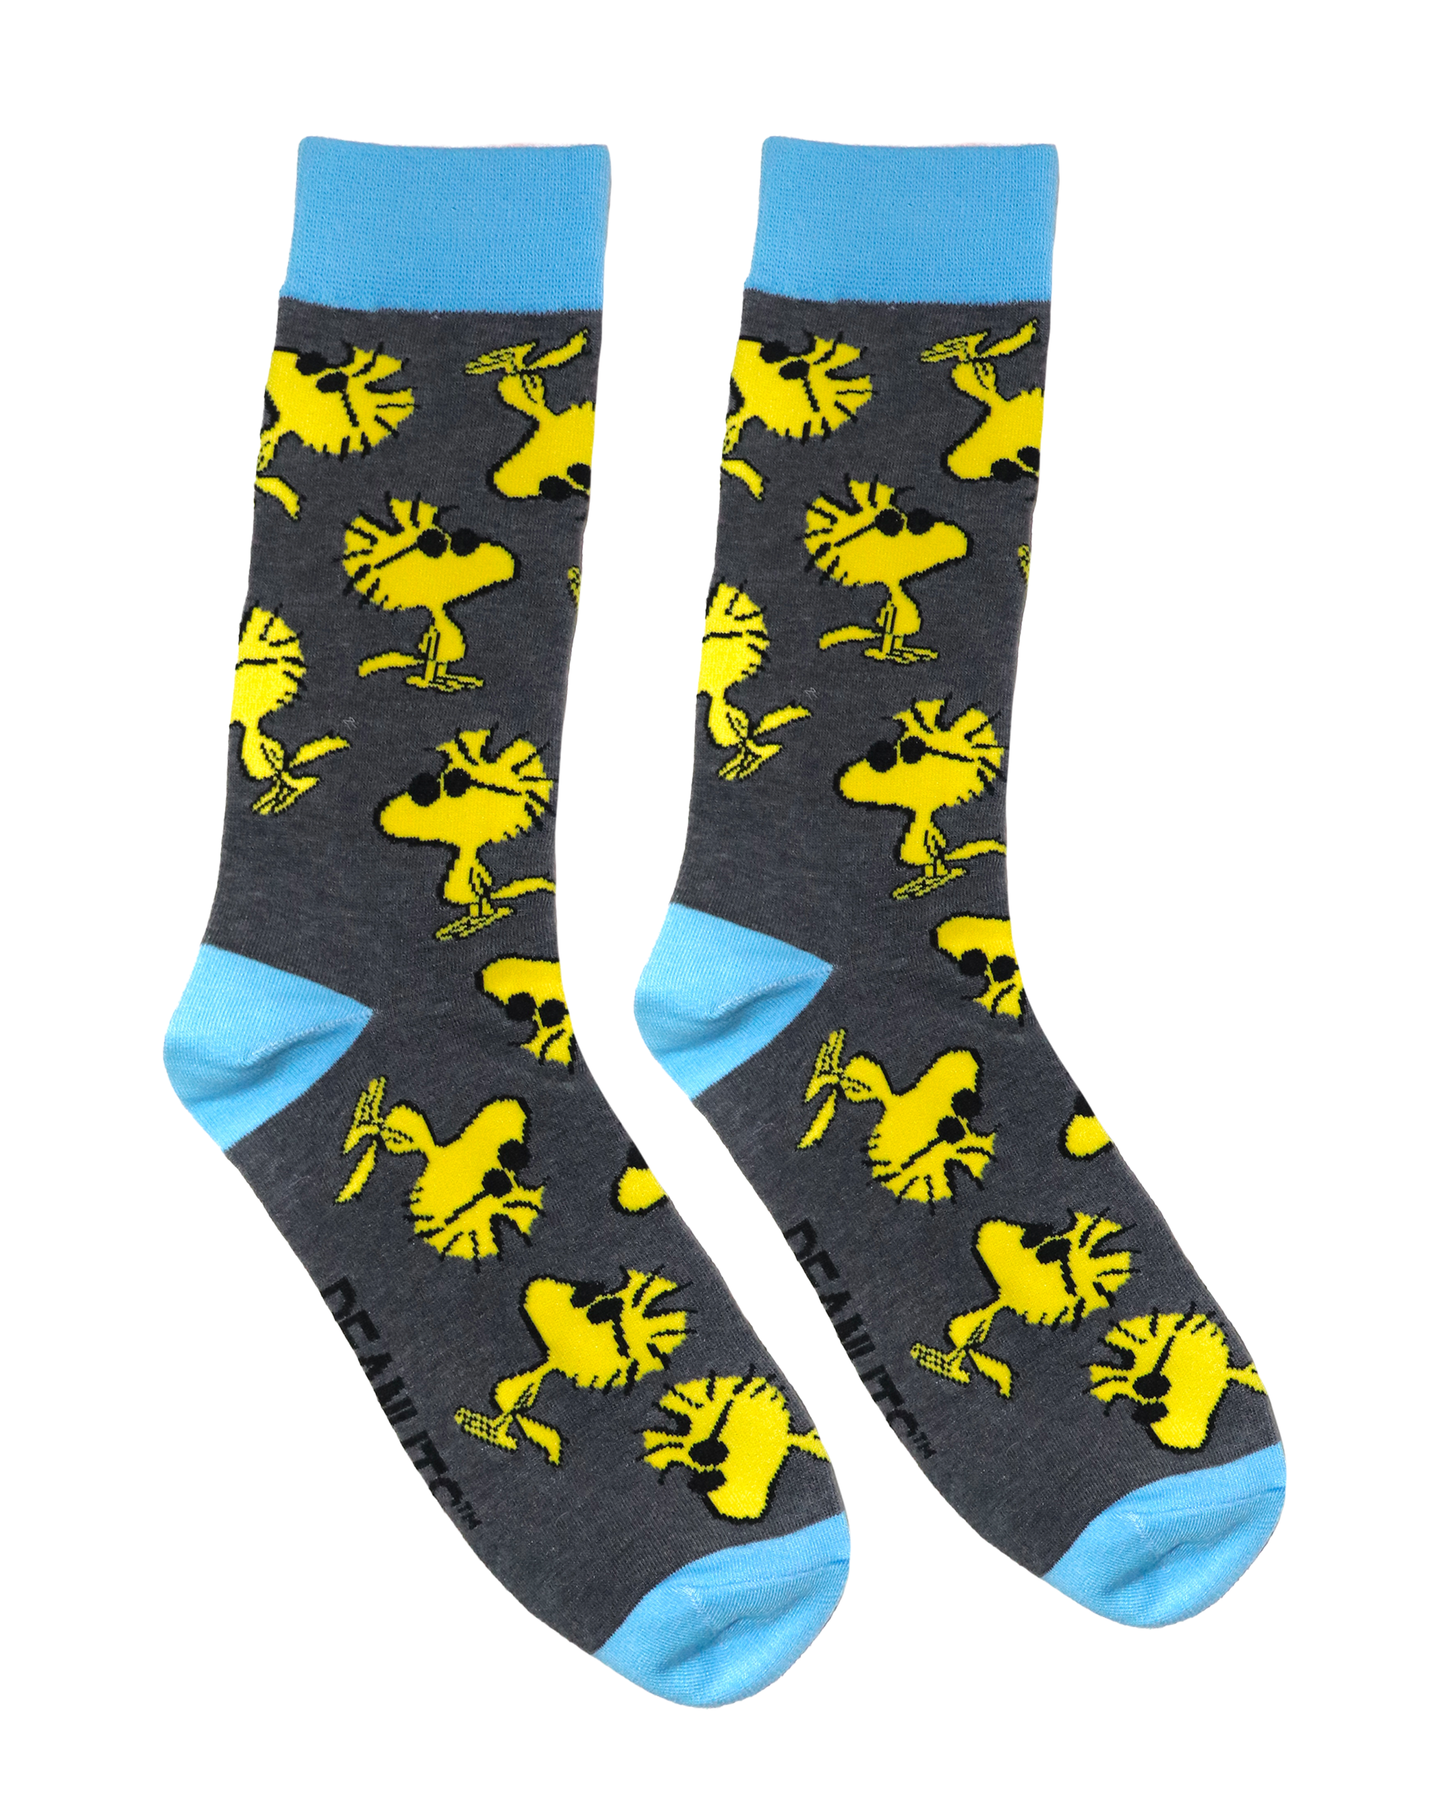 A pair of socks depicting the cool dude Woodstock. Grey legs, blue cuff, heel and toe.